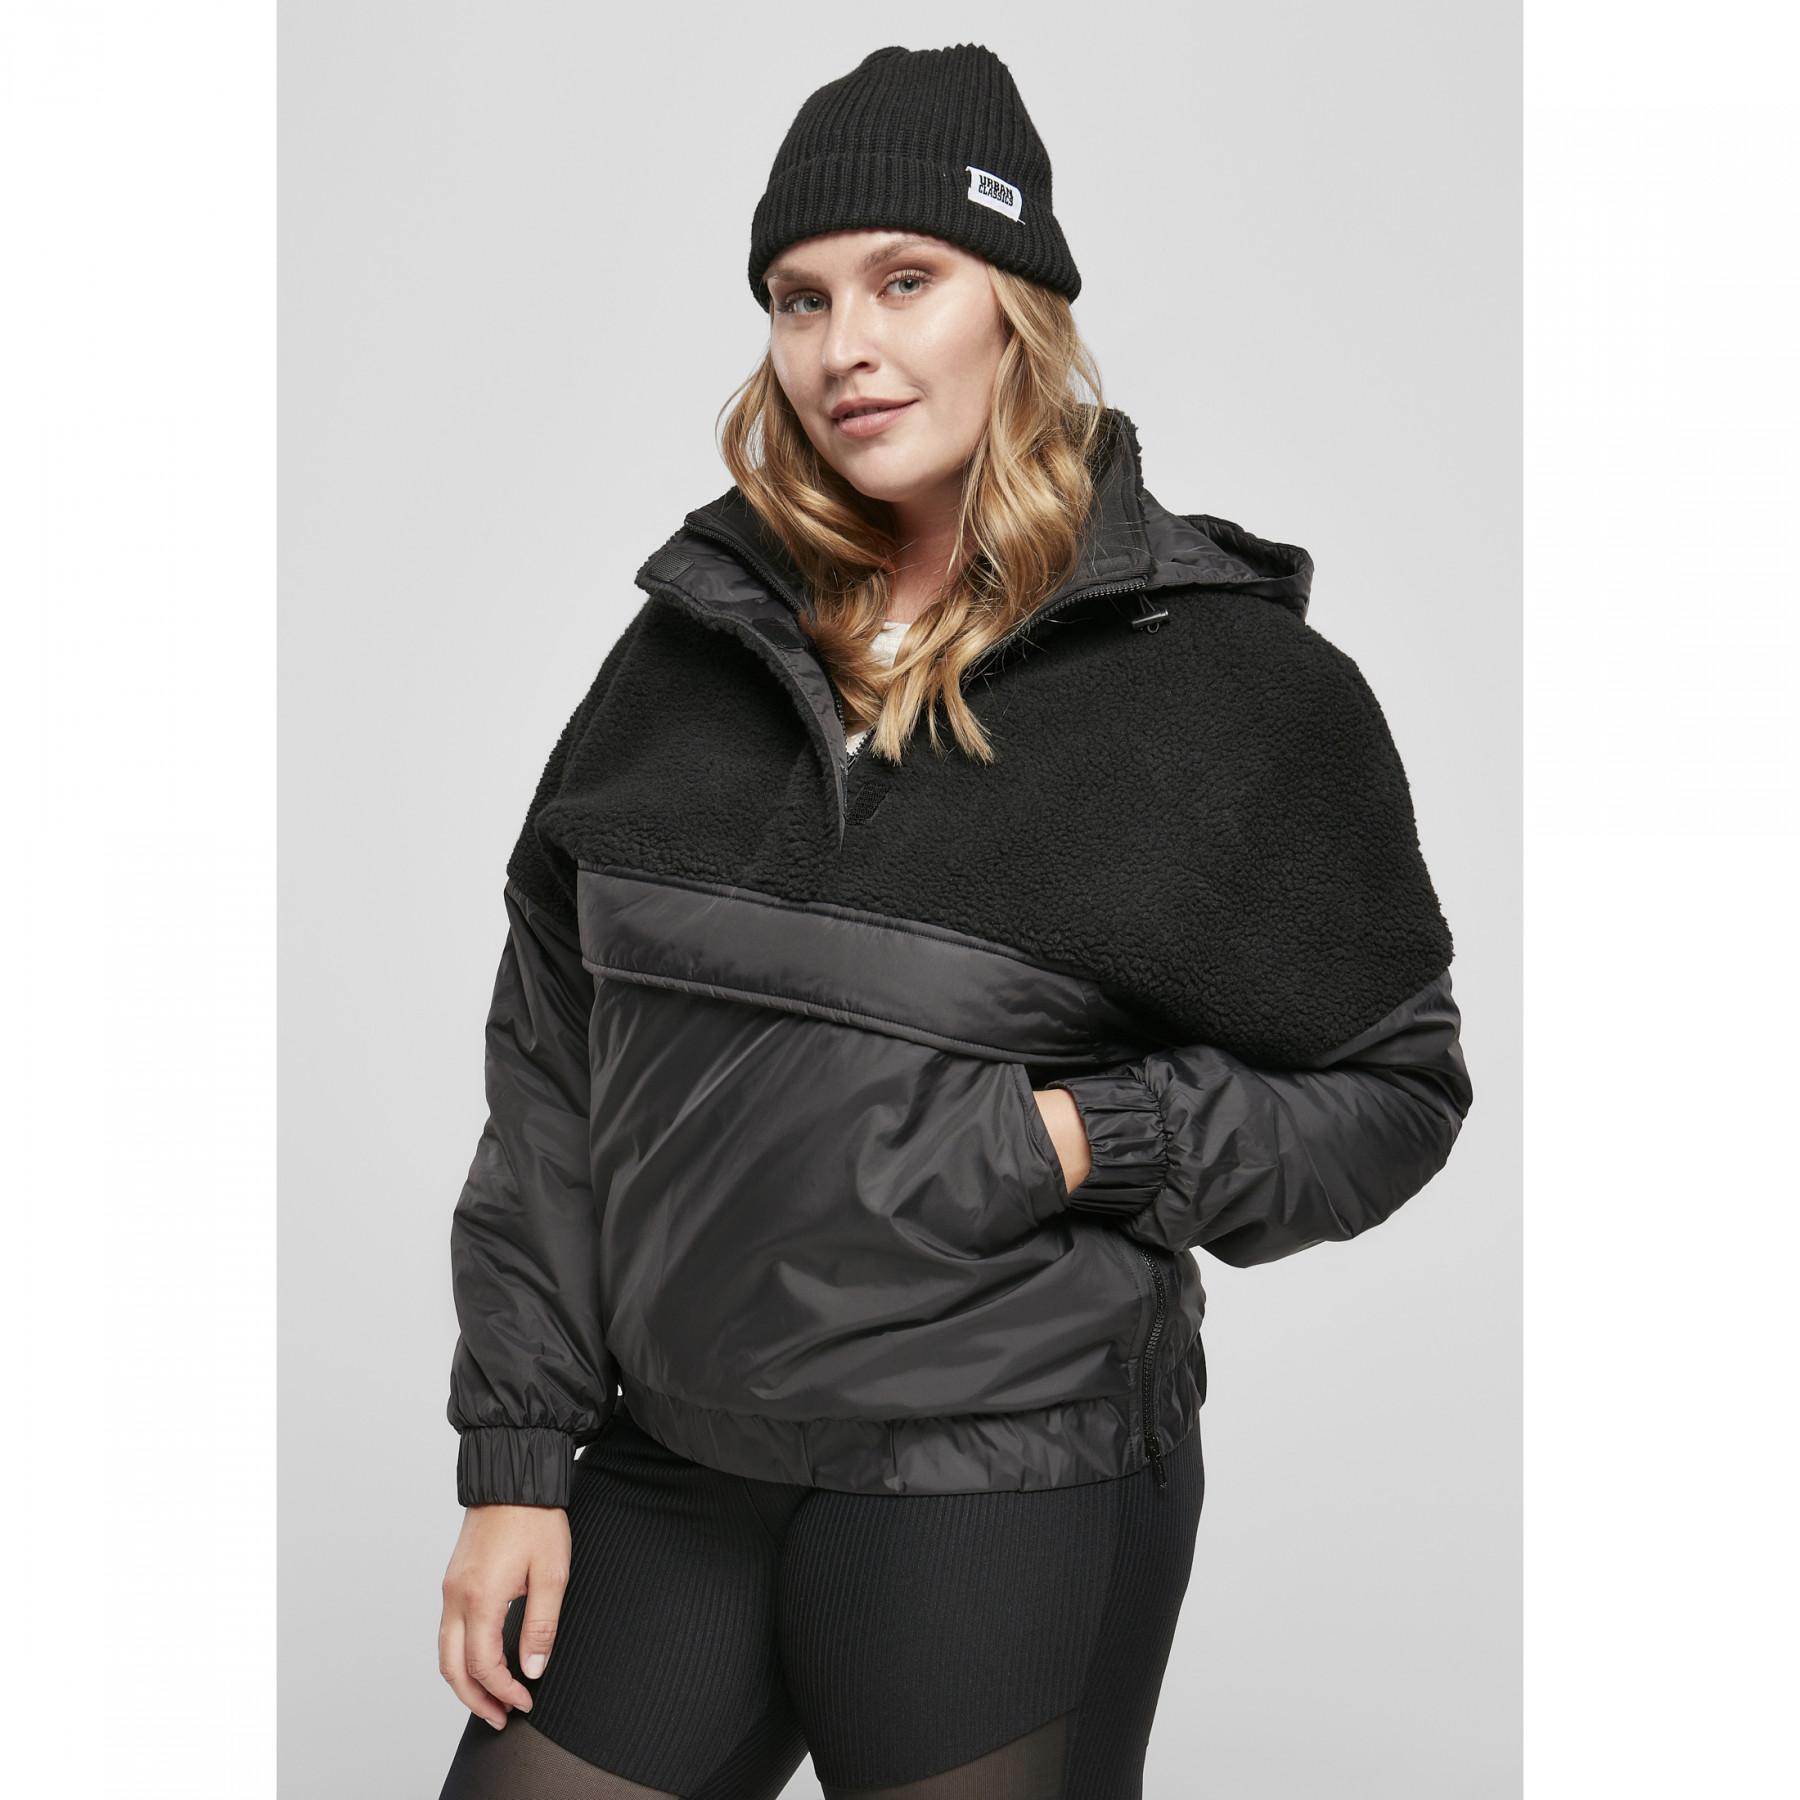 Polaire femme Urban Classics sherpa mix pull over-grandes tailles